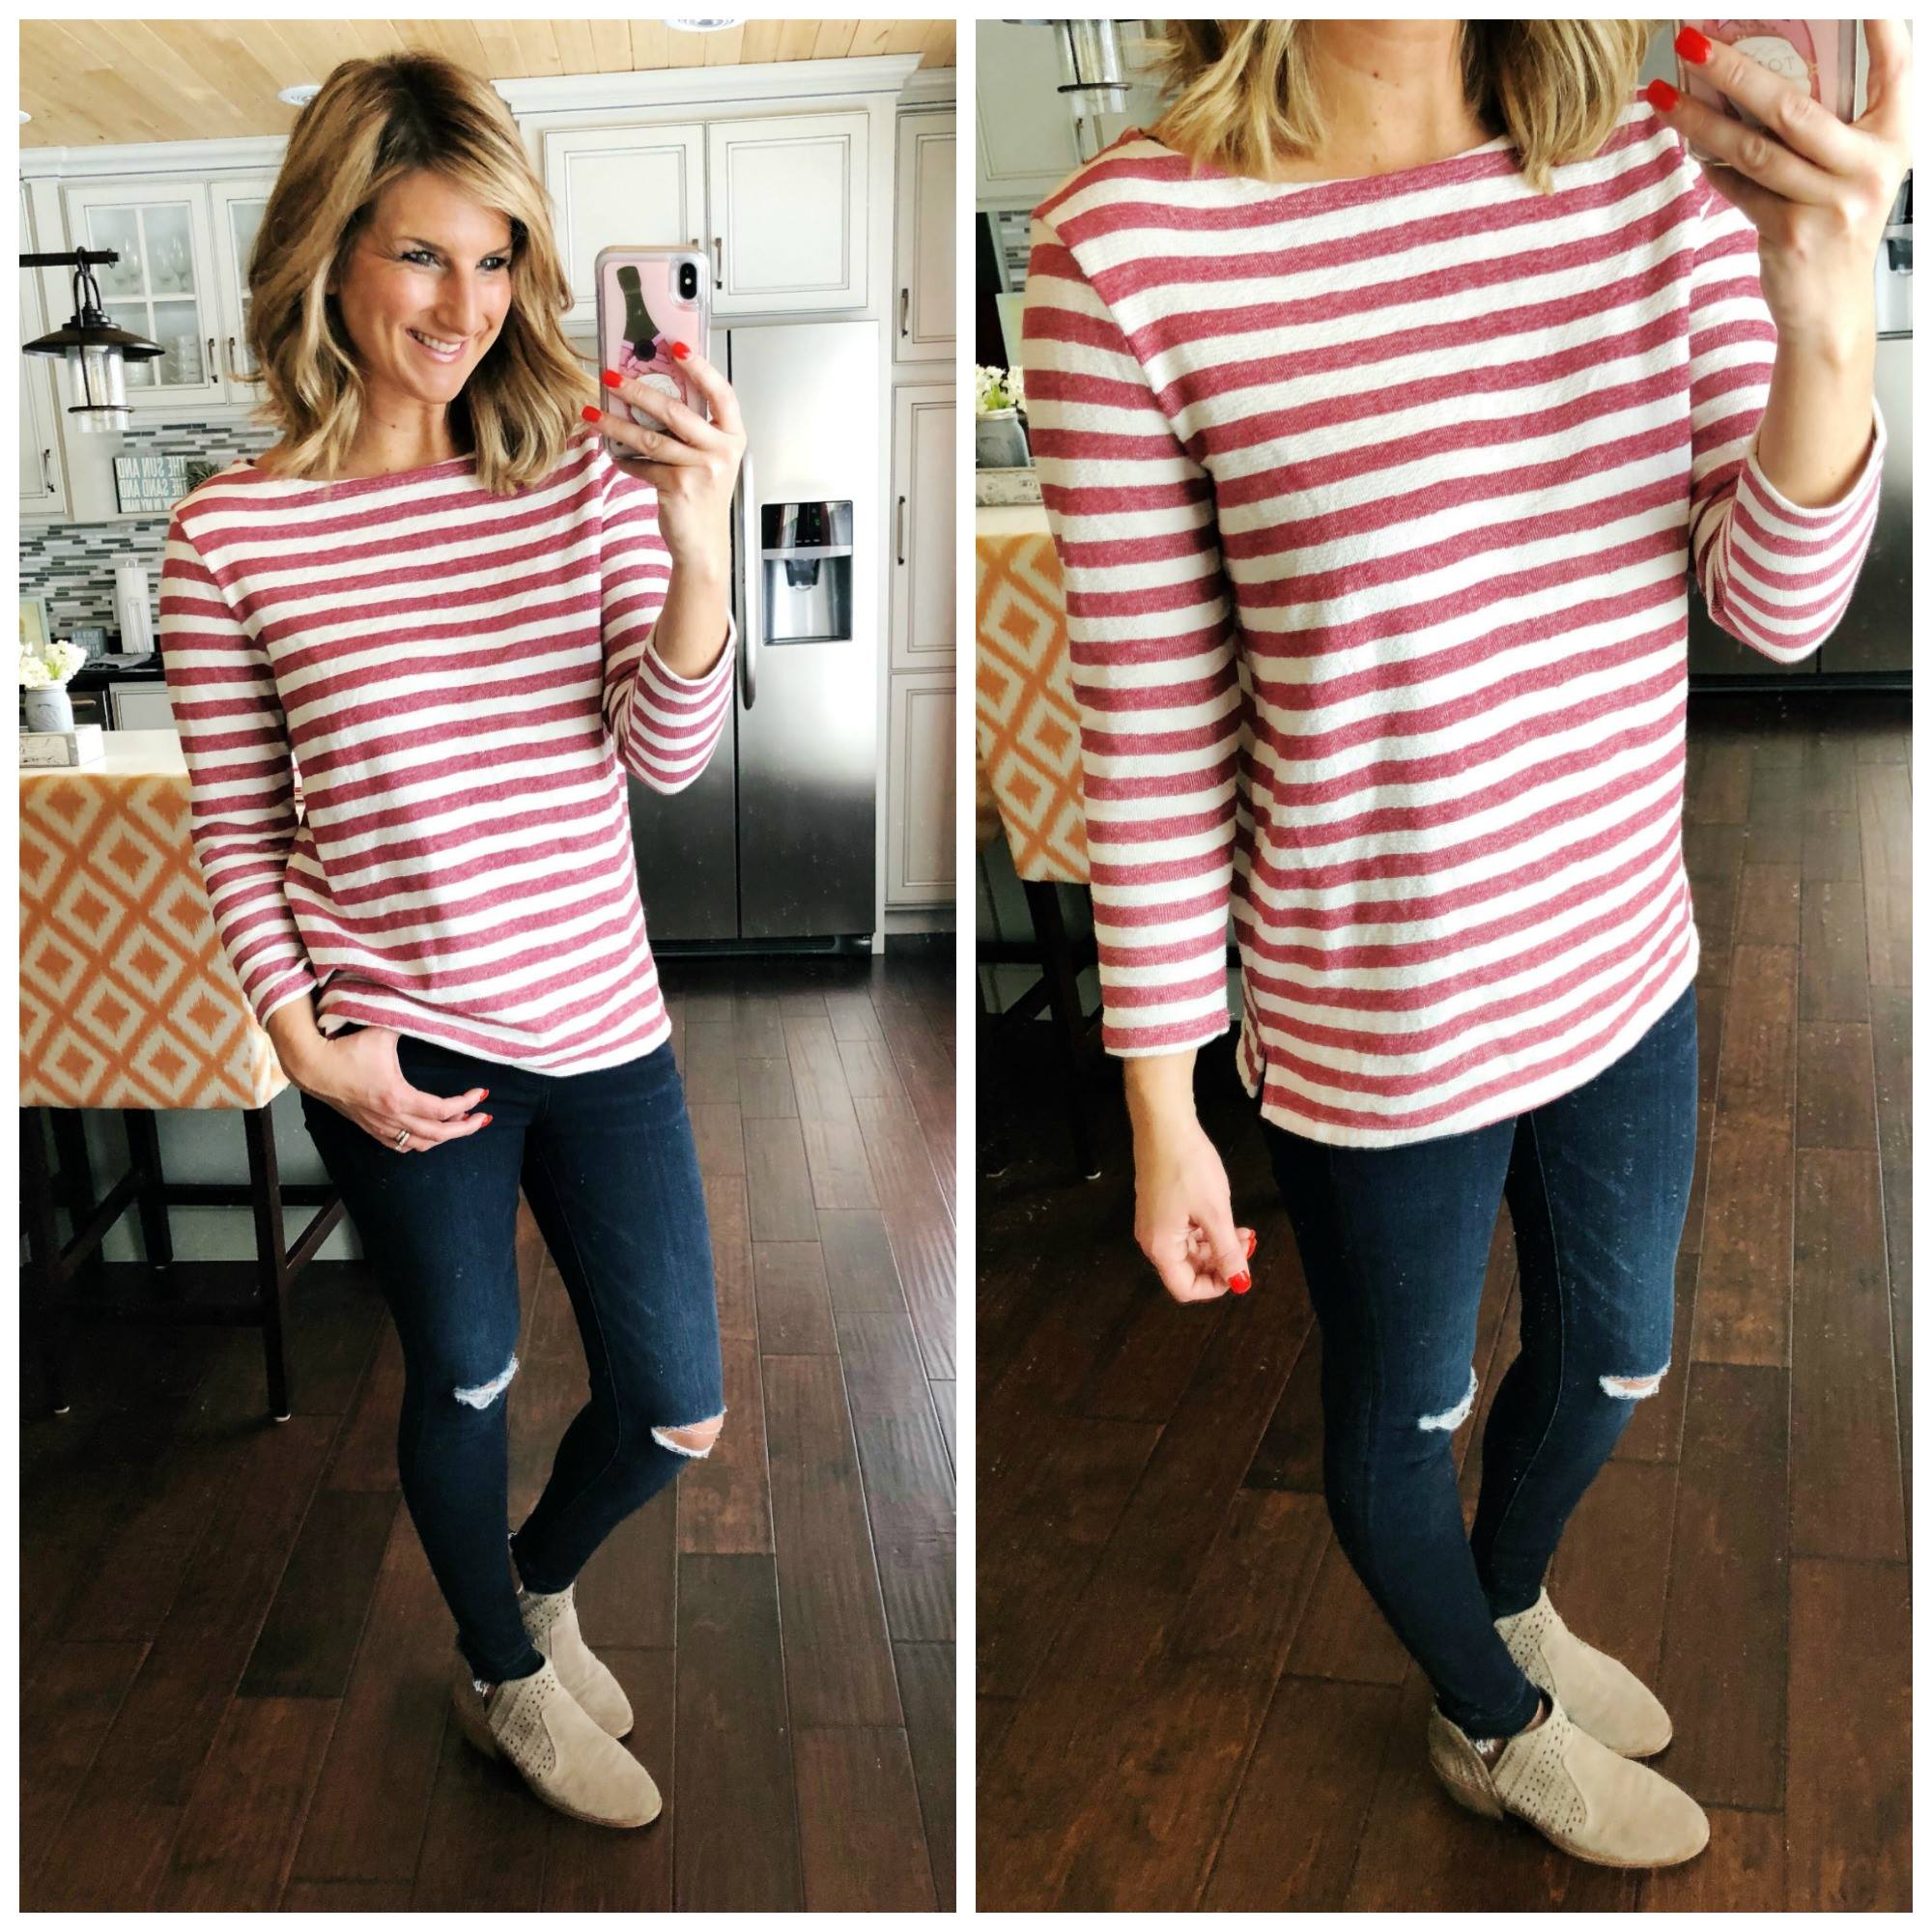 Striped Top + Distressed Jeans + Tan Booties 